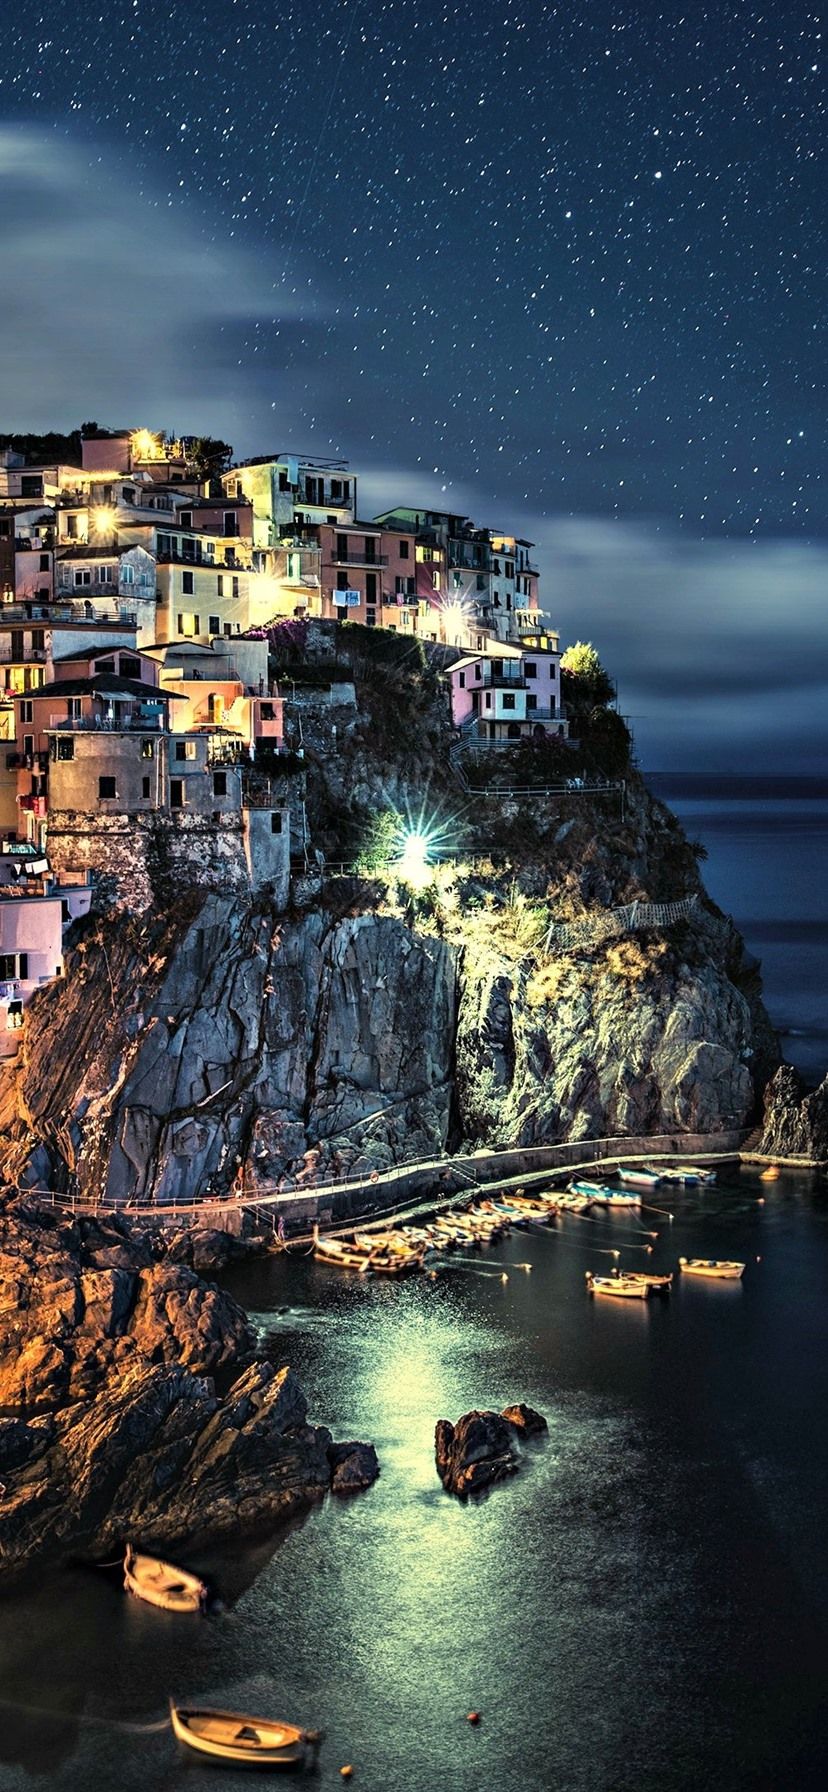 Italy, Cinque Terre, Coast, Houses, Sea, Starry, Beautiful Night 1080x1920 IPhone 8 7 6 6S Plus Wallpaper, Background, Picture, Image